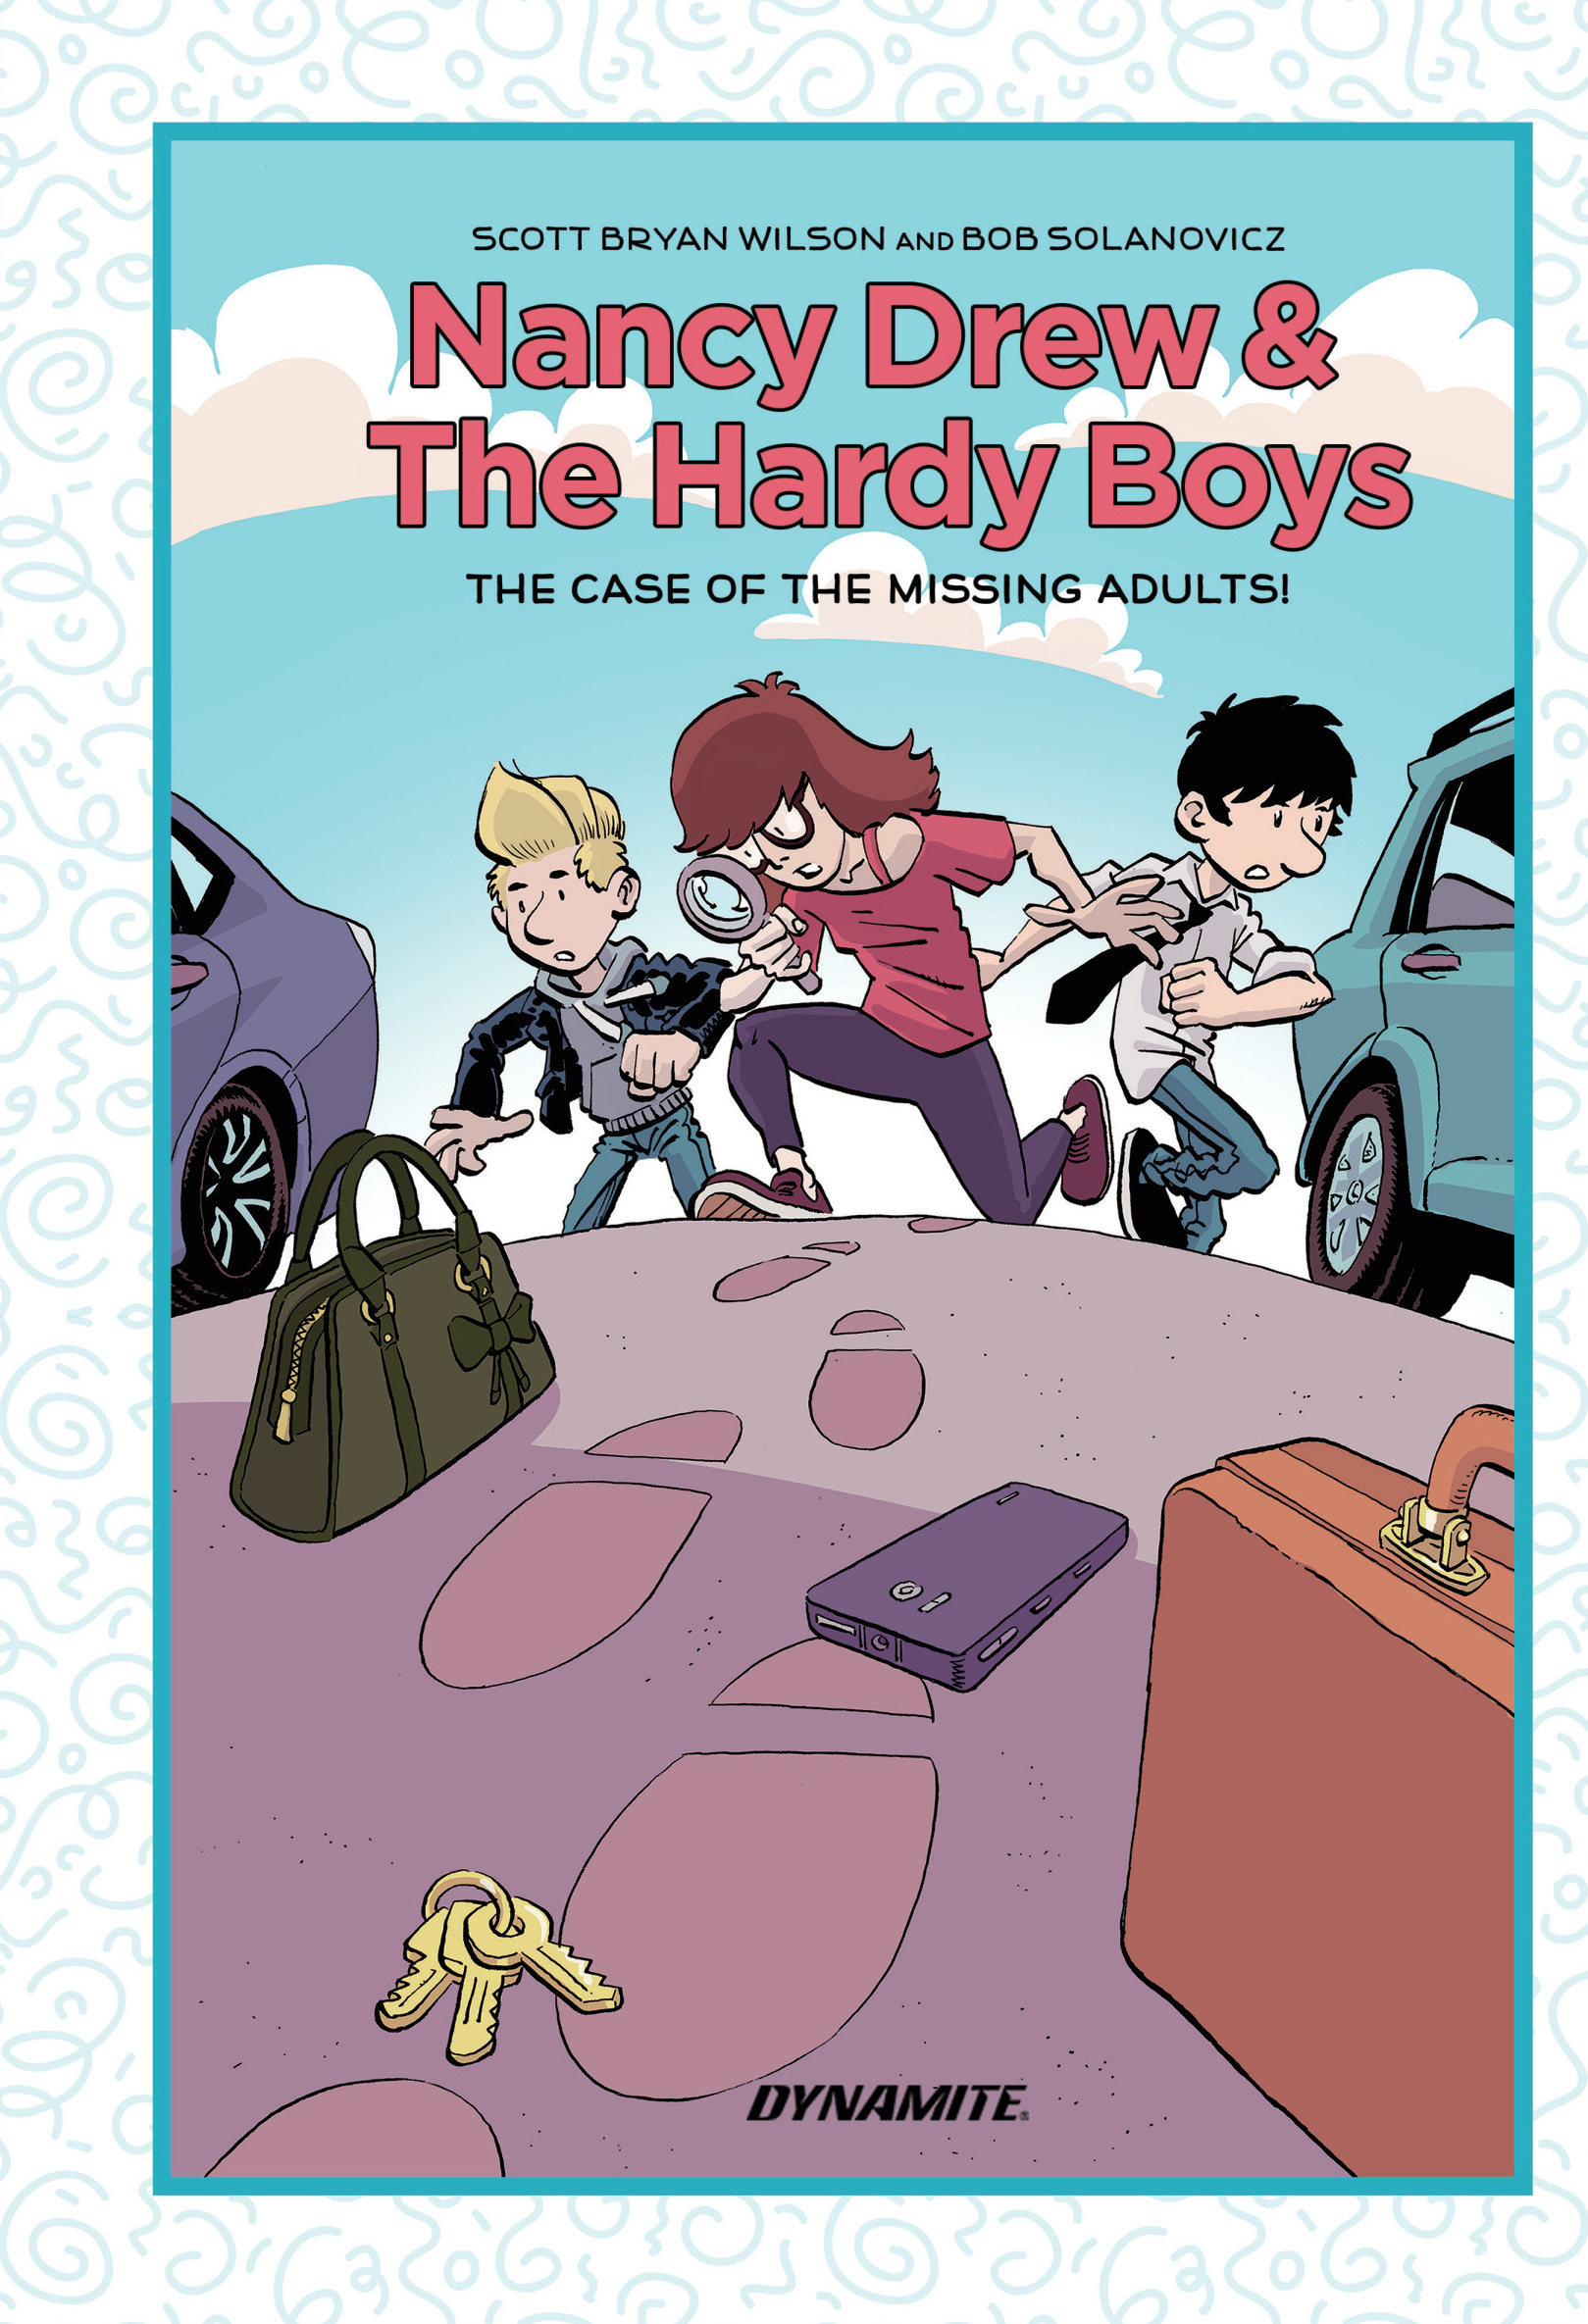 Read online Nancy Drew & the Hardy Boys: The Mystery of the Missing Adults! comic -  Issue # TPB - 1